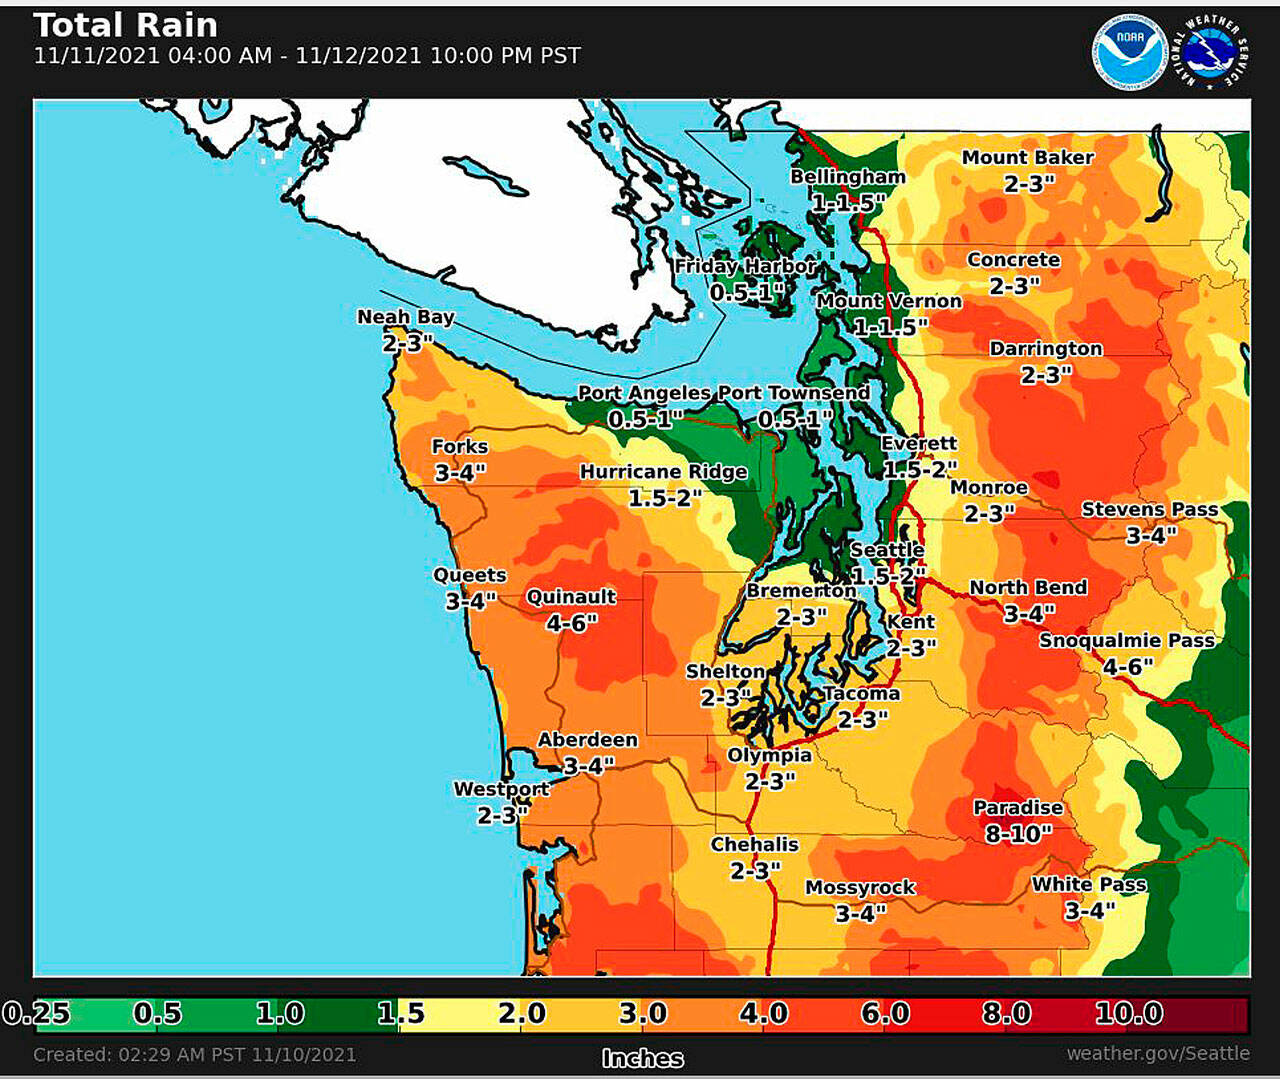 Heavy rain expected across the region Thursday and Friday. (Courtesy National Weather Service Seattle)